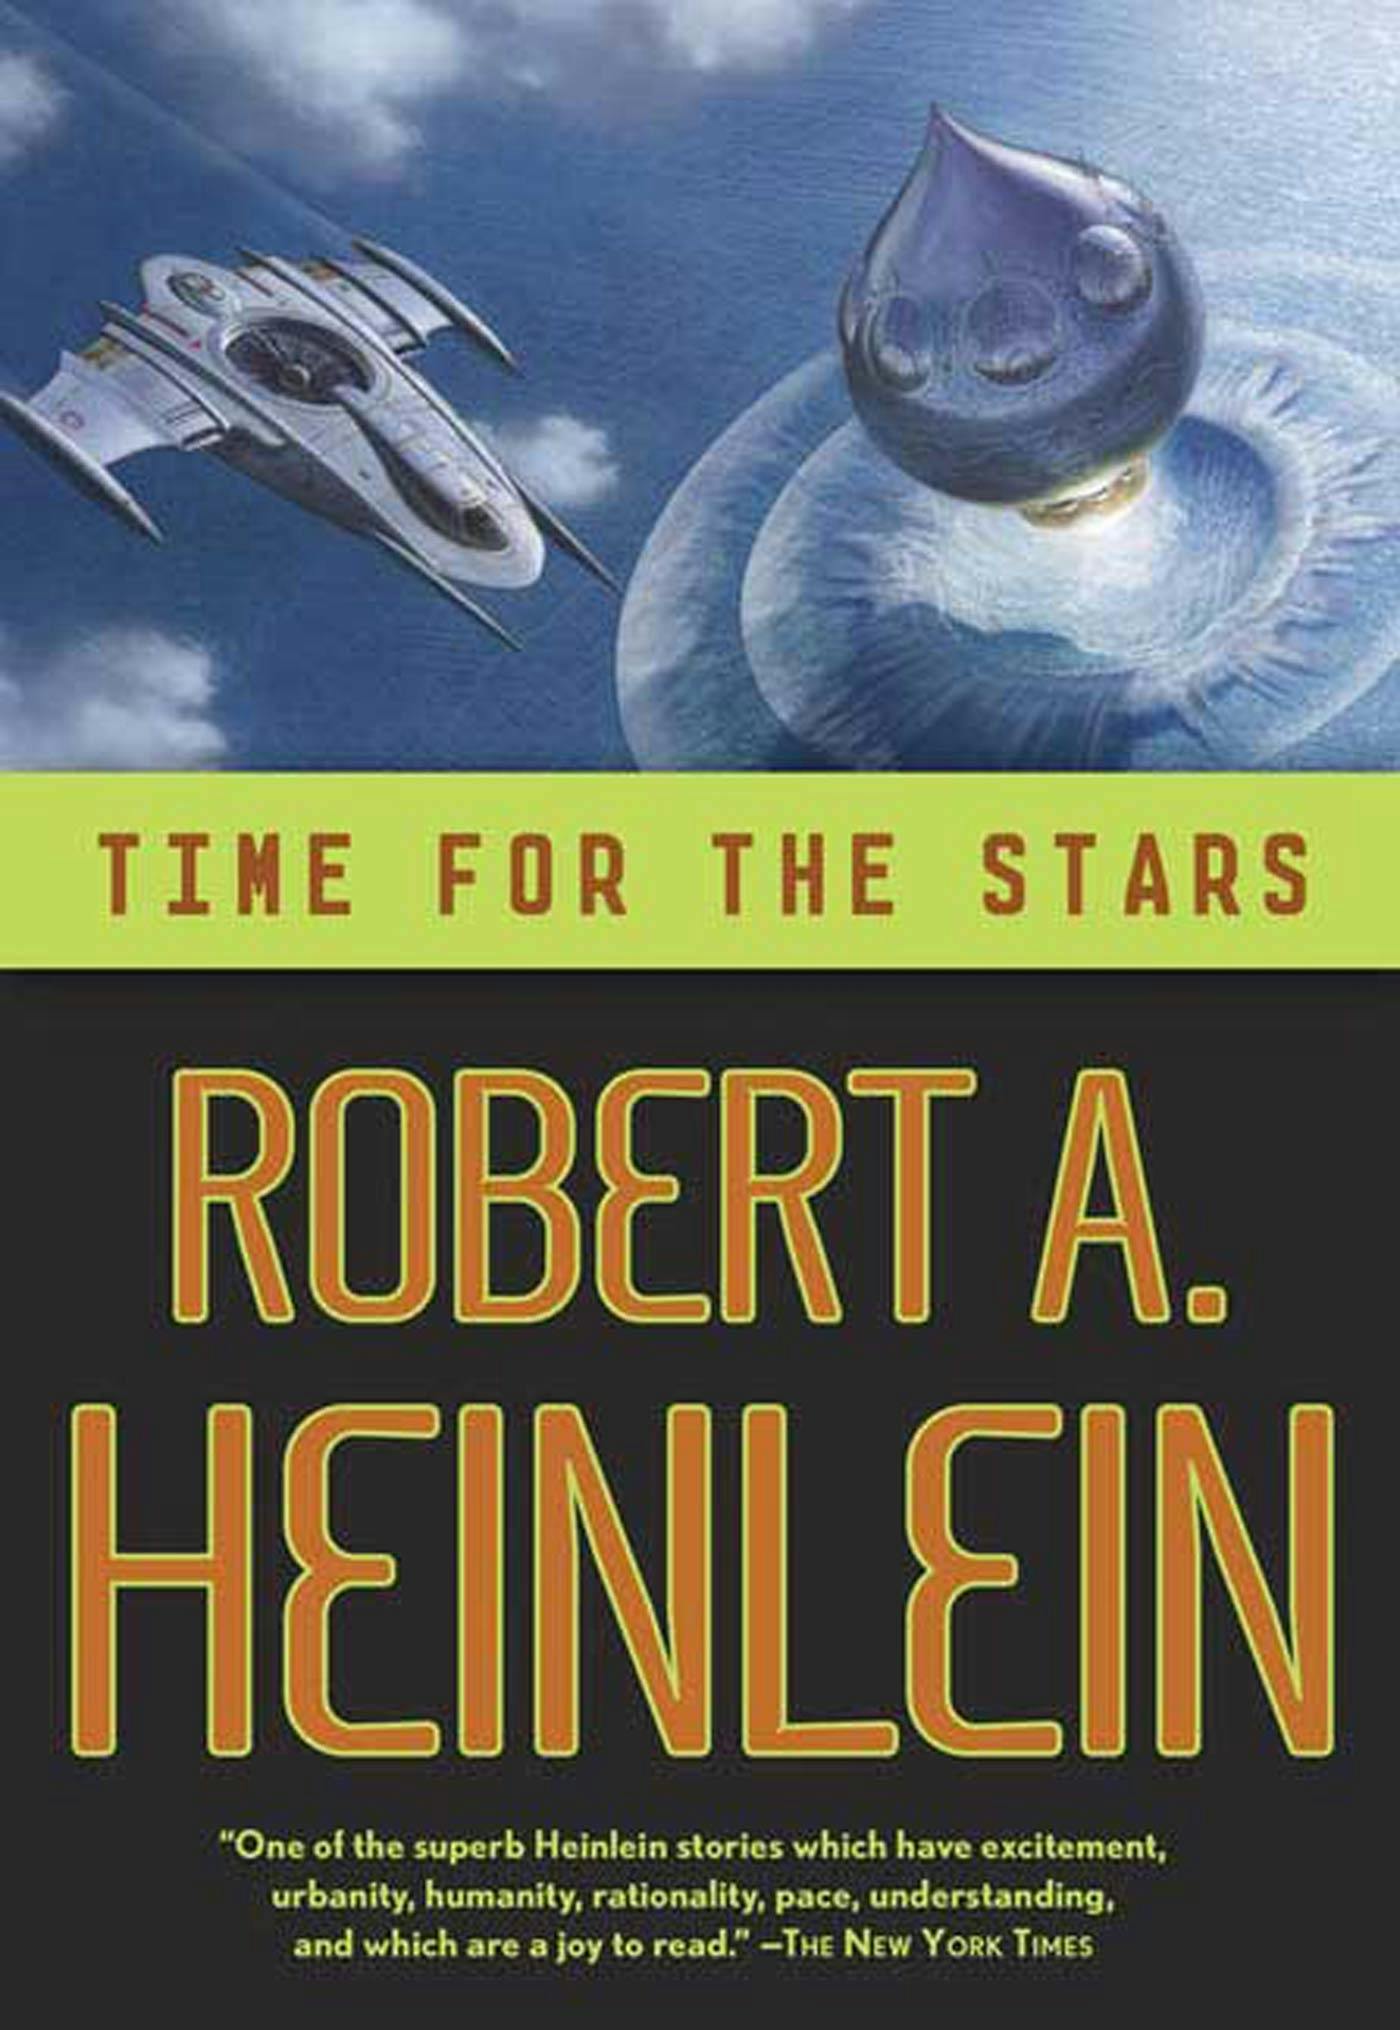 Cover for the book titled as: Time for the Stars